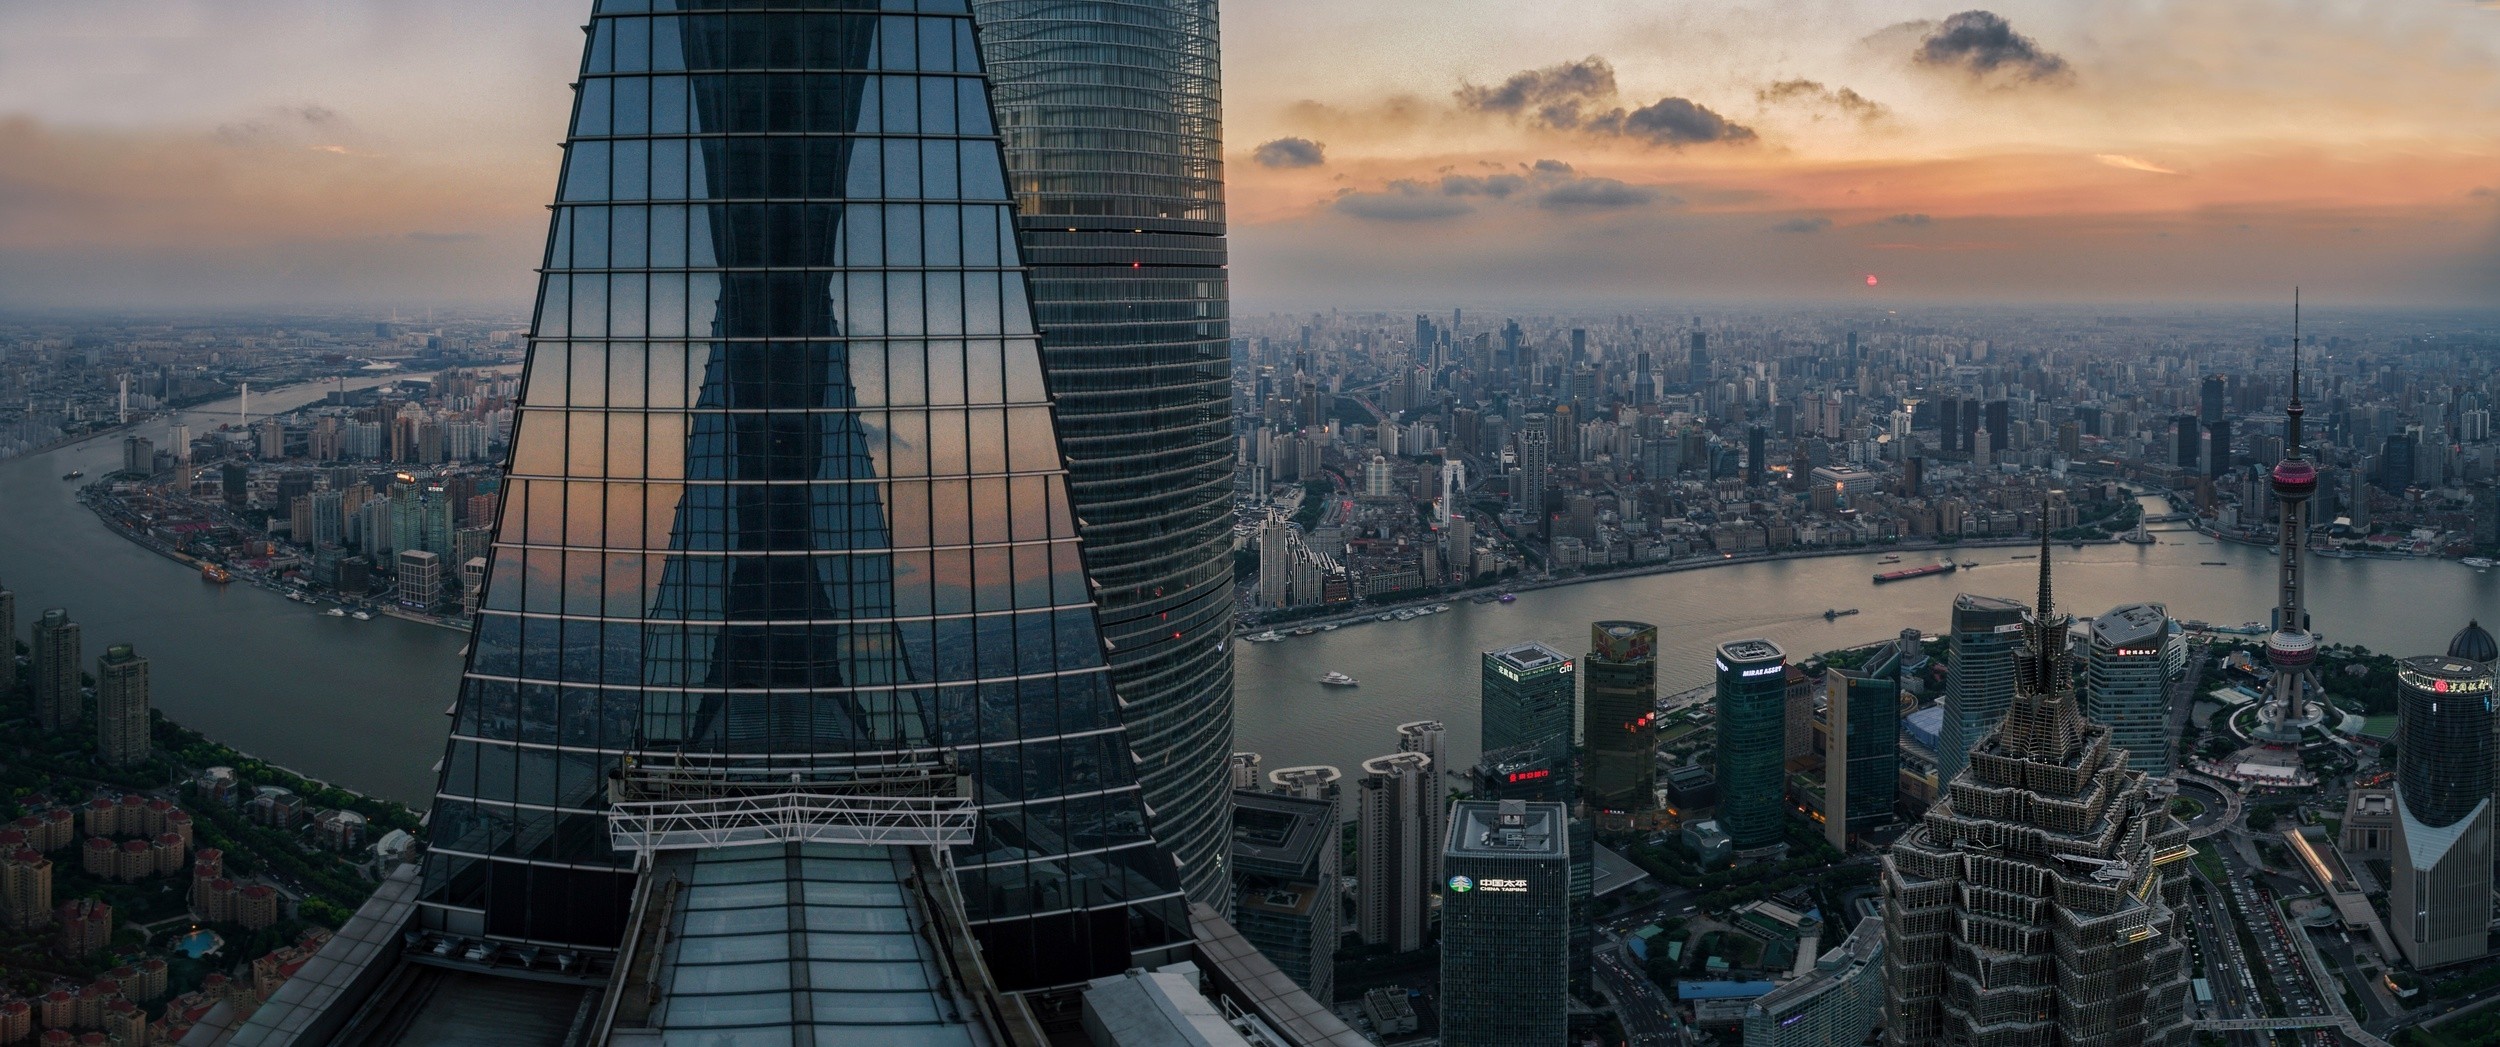 photography, Nature, Landscape, Cityscape, Panorama, Sunset, Skyscraper, Steel, Glass, Building, River, Aerial view, Architecture, Metropolis, Modern, Shanghai, China Wallpaper